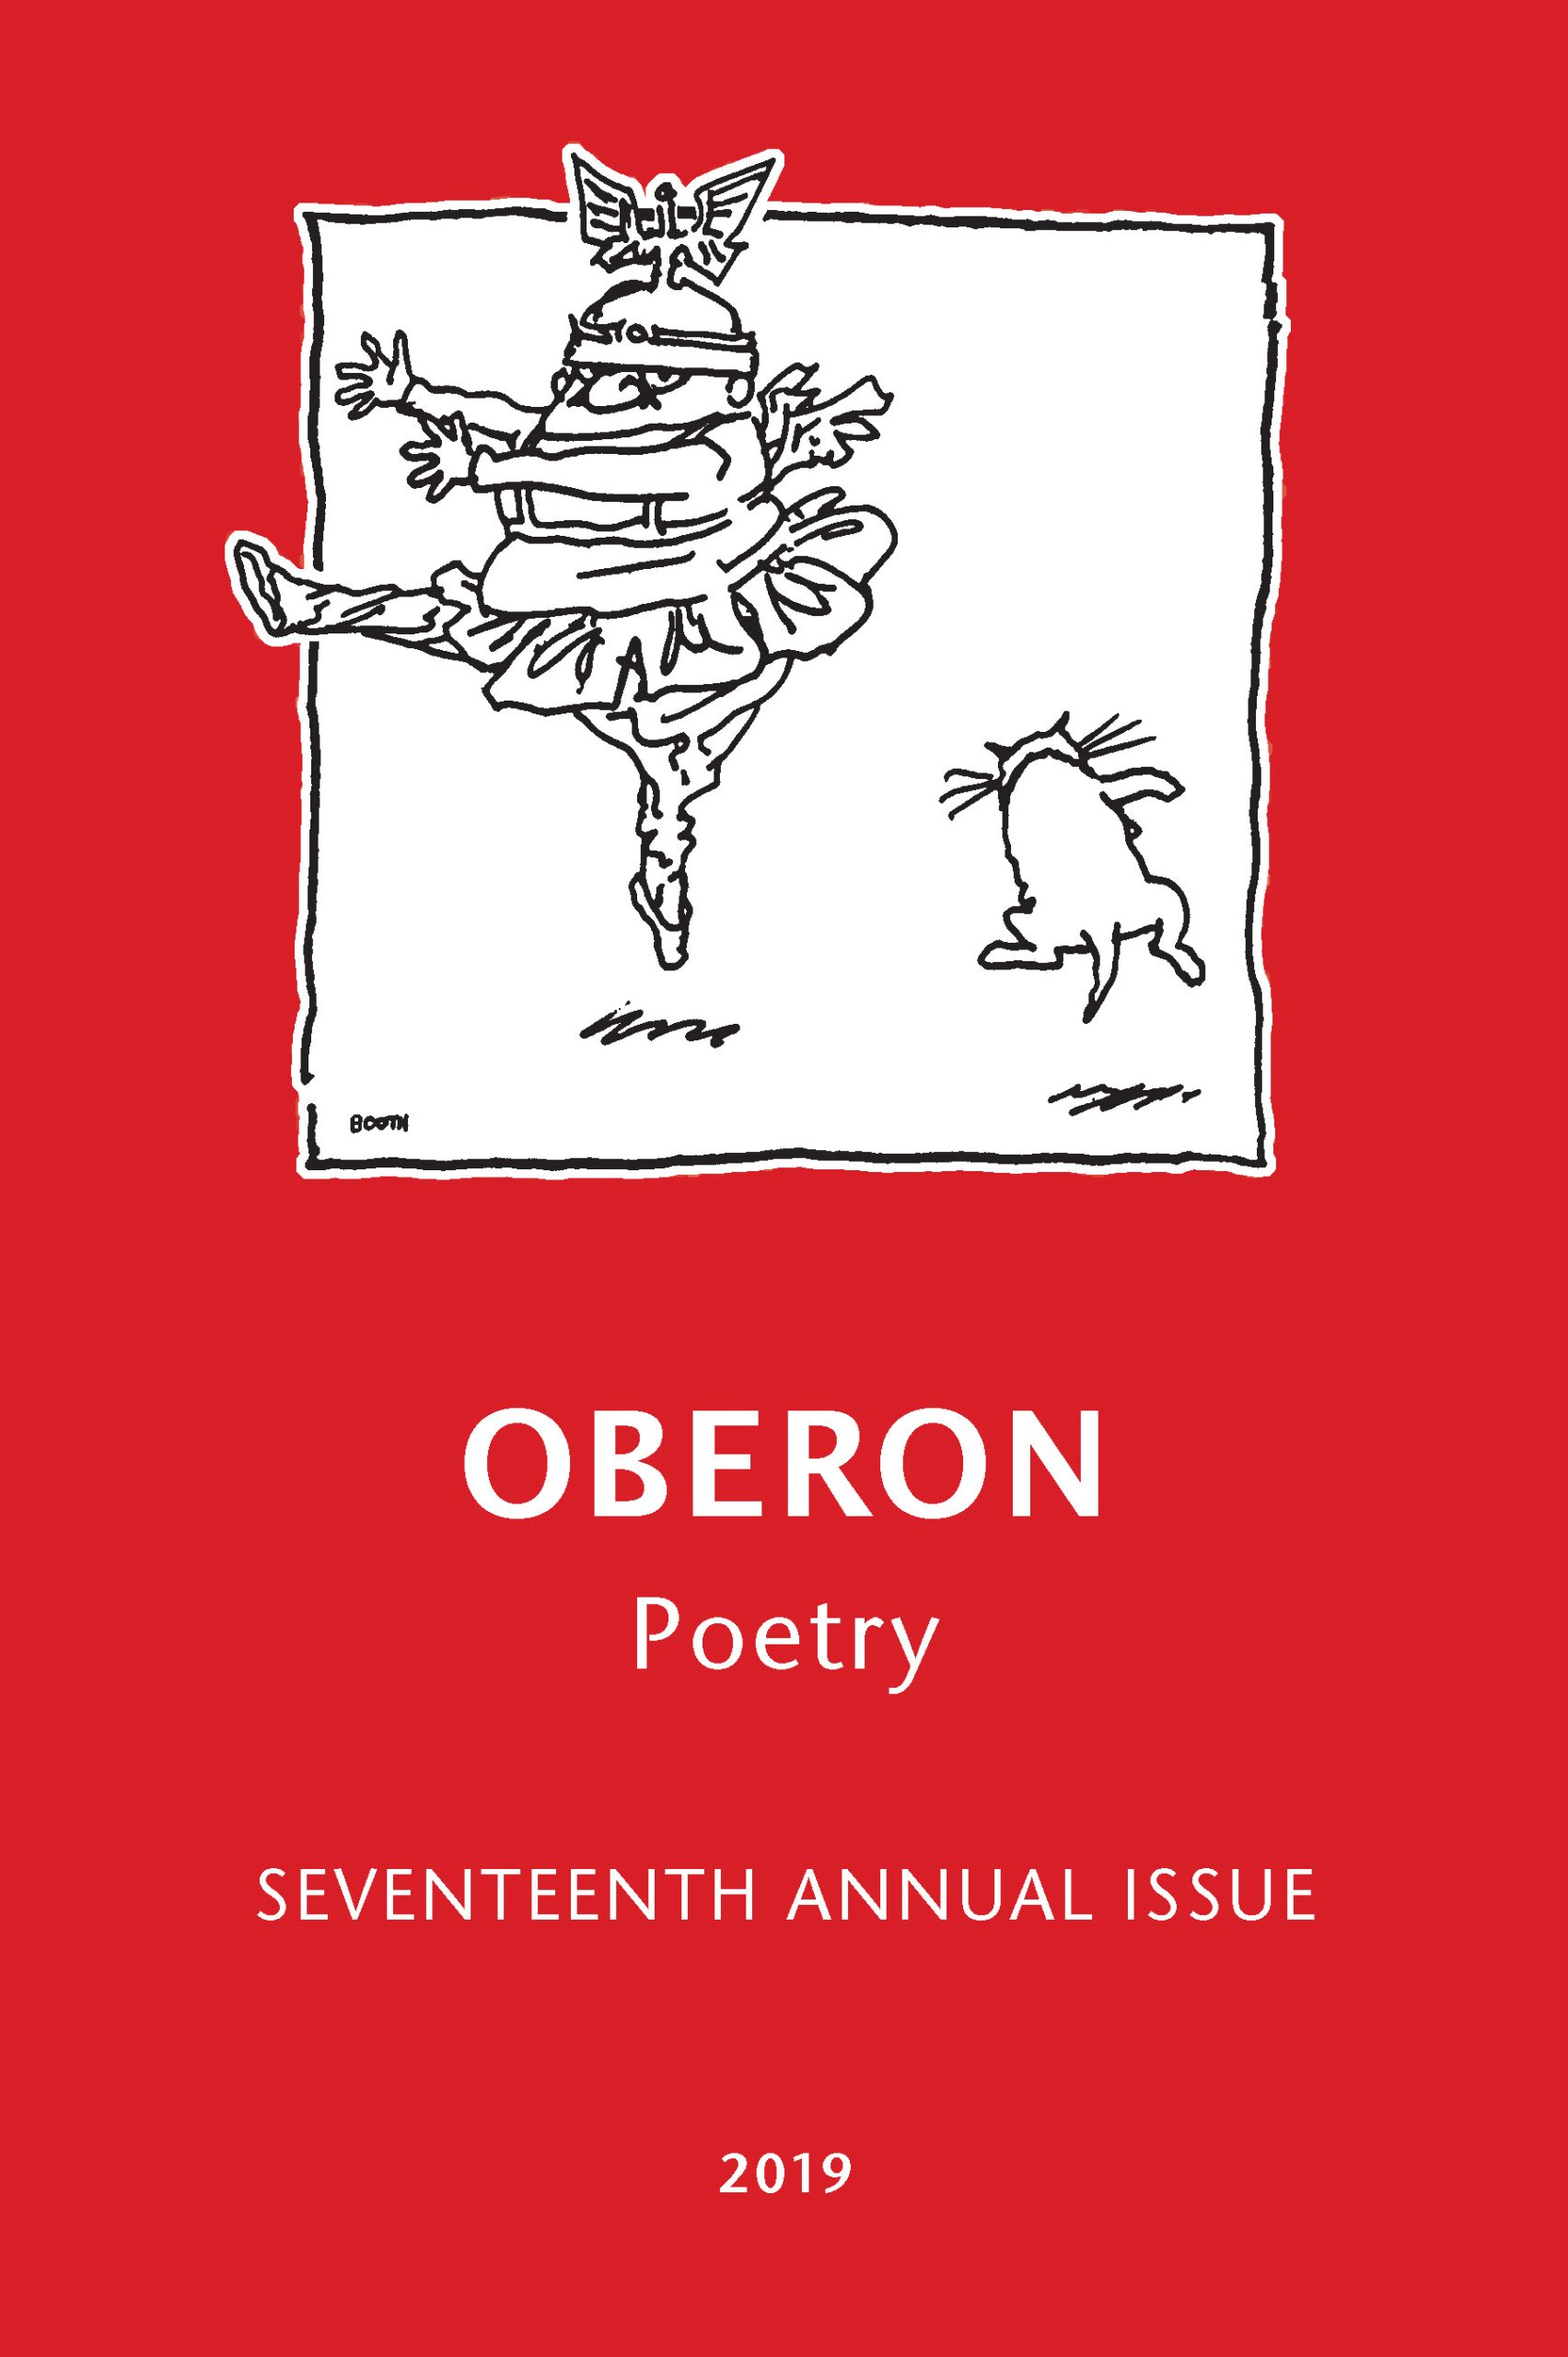 Oberon Poetry: Sixth Annual Issue